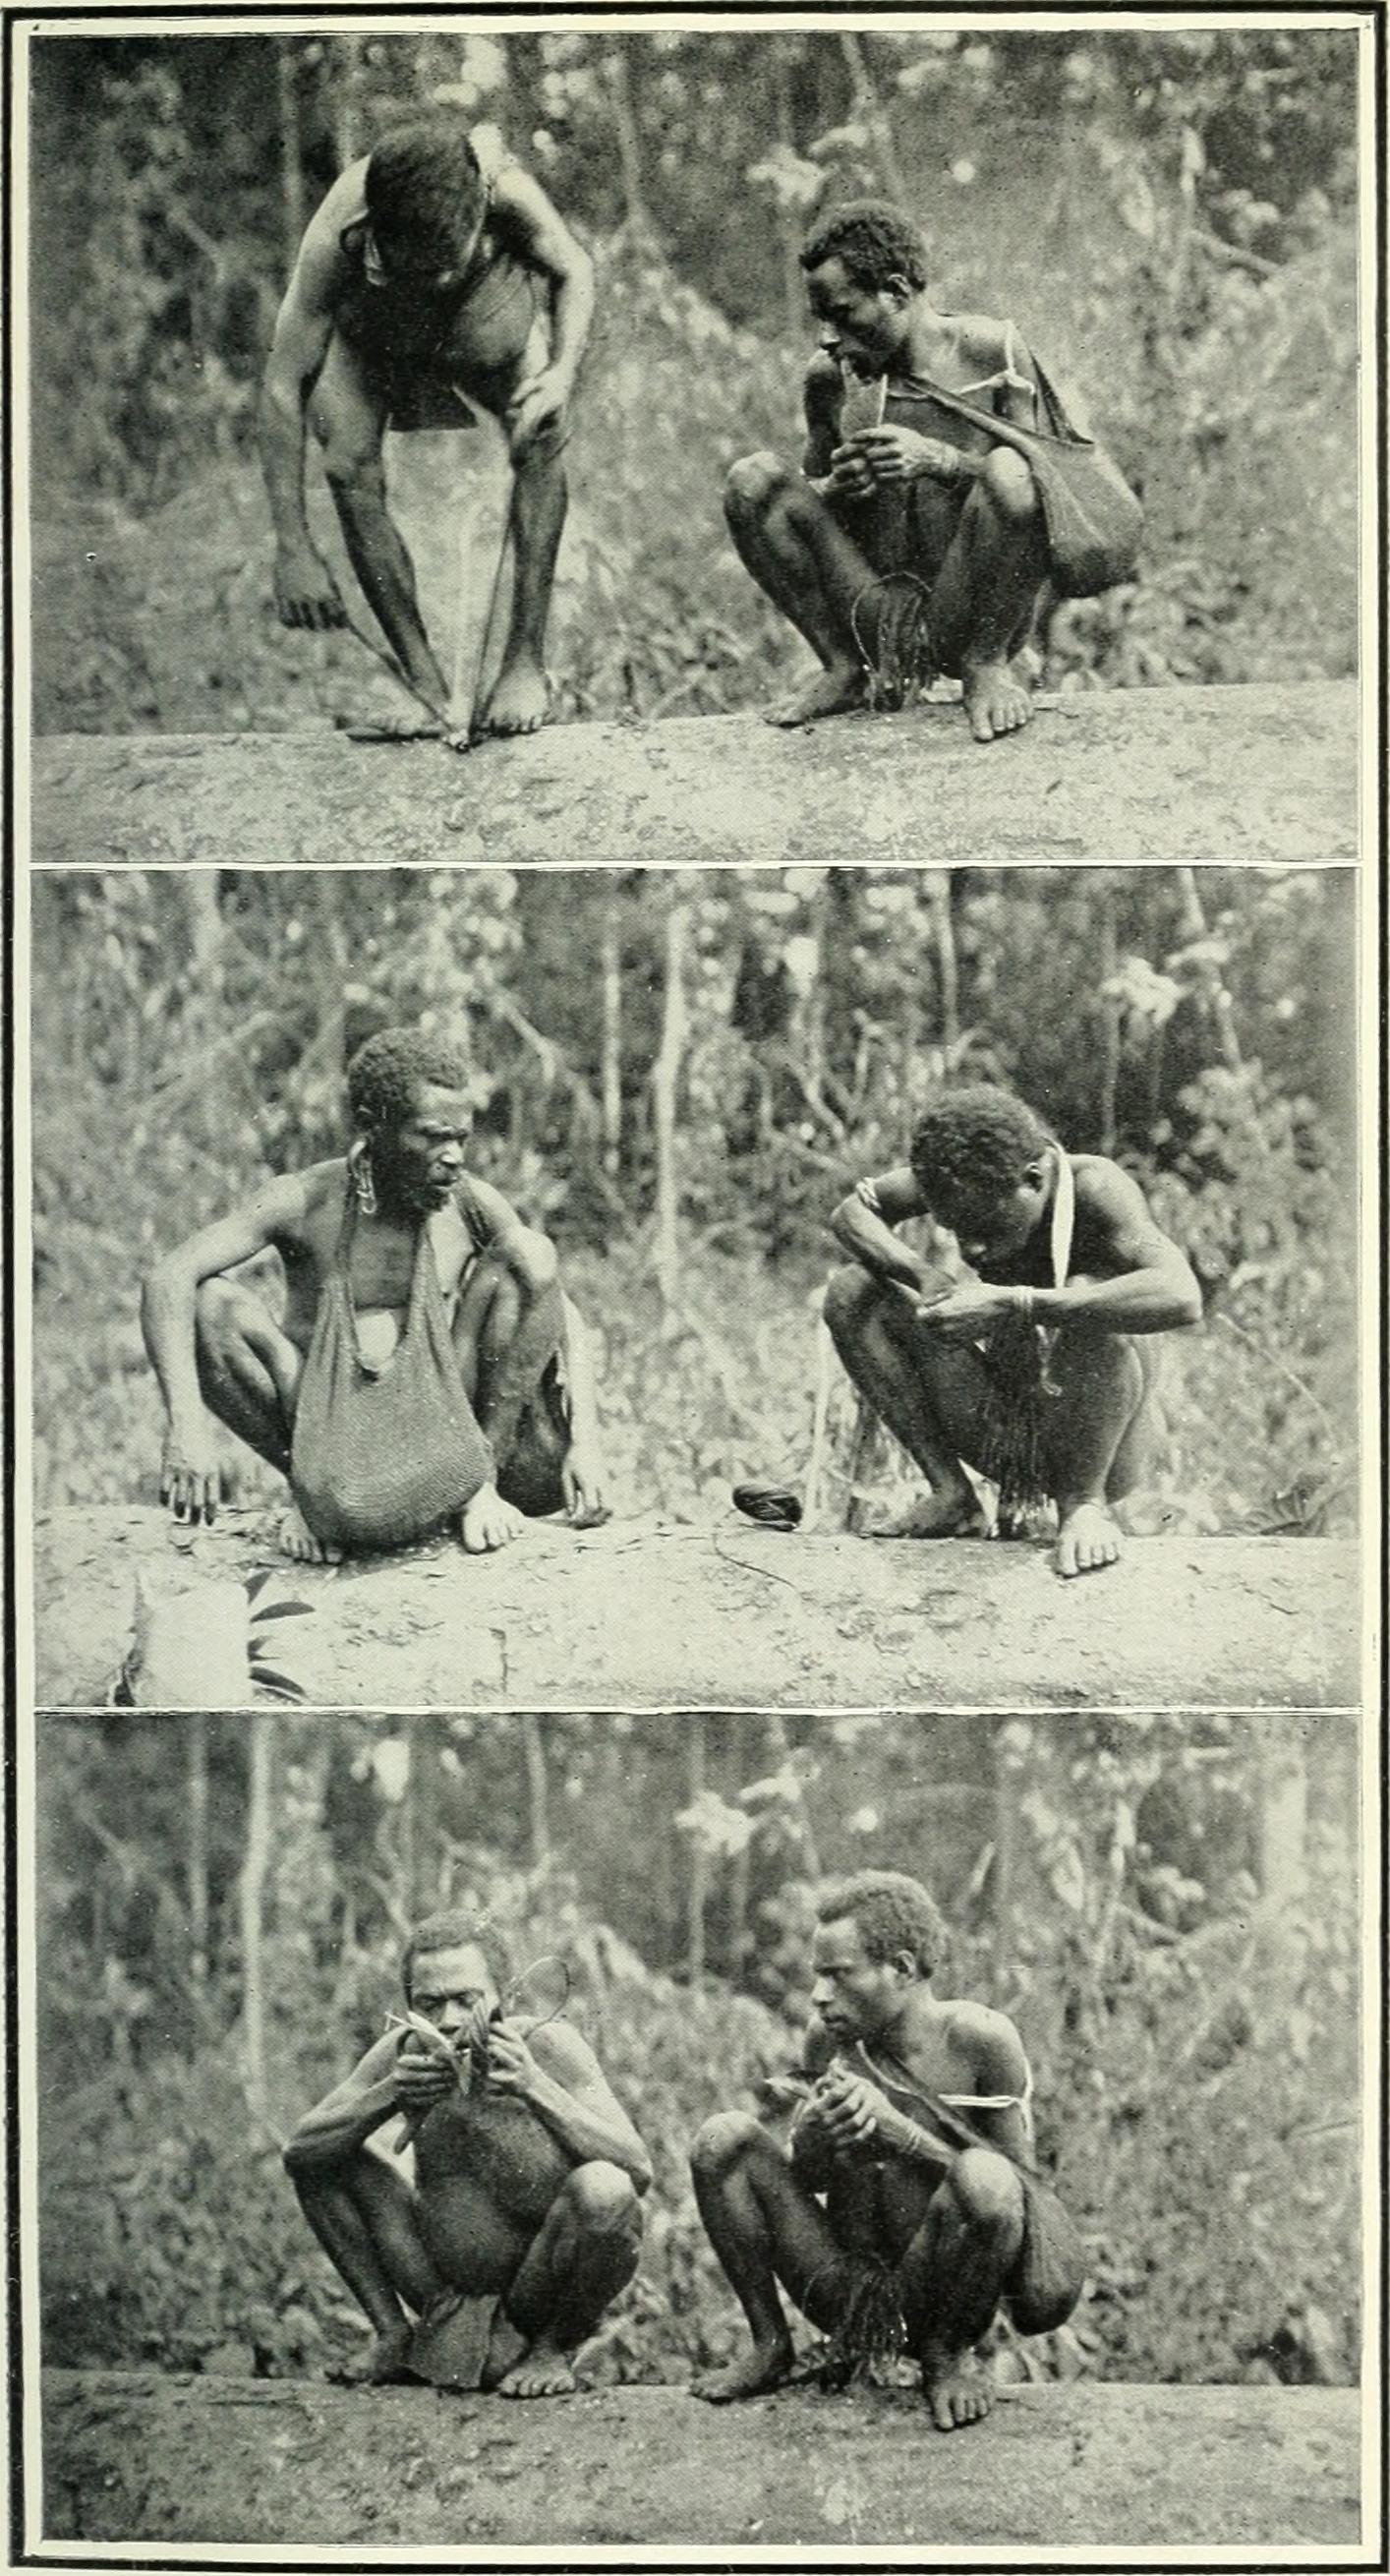 The_land_of_the_New_Guinea_pygmies;_an_account_of_the_story_of_a_pioneer_journey_of_exploration_into_the_heart_of_New_Guinea_(1913)_(14579339729)